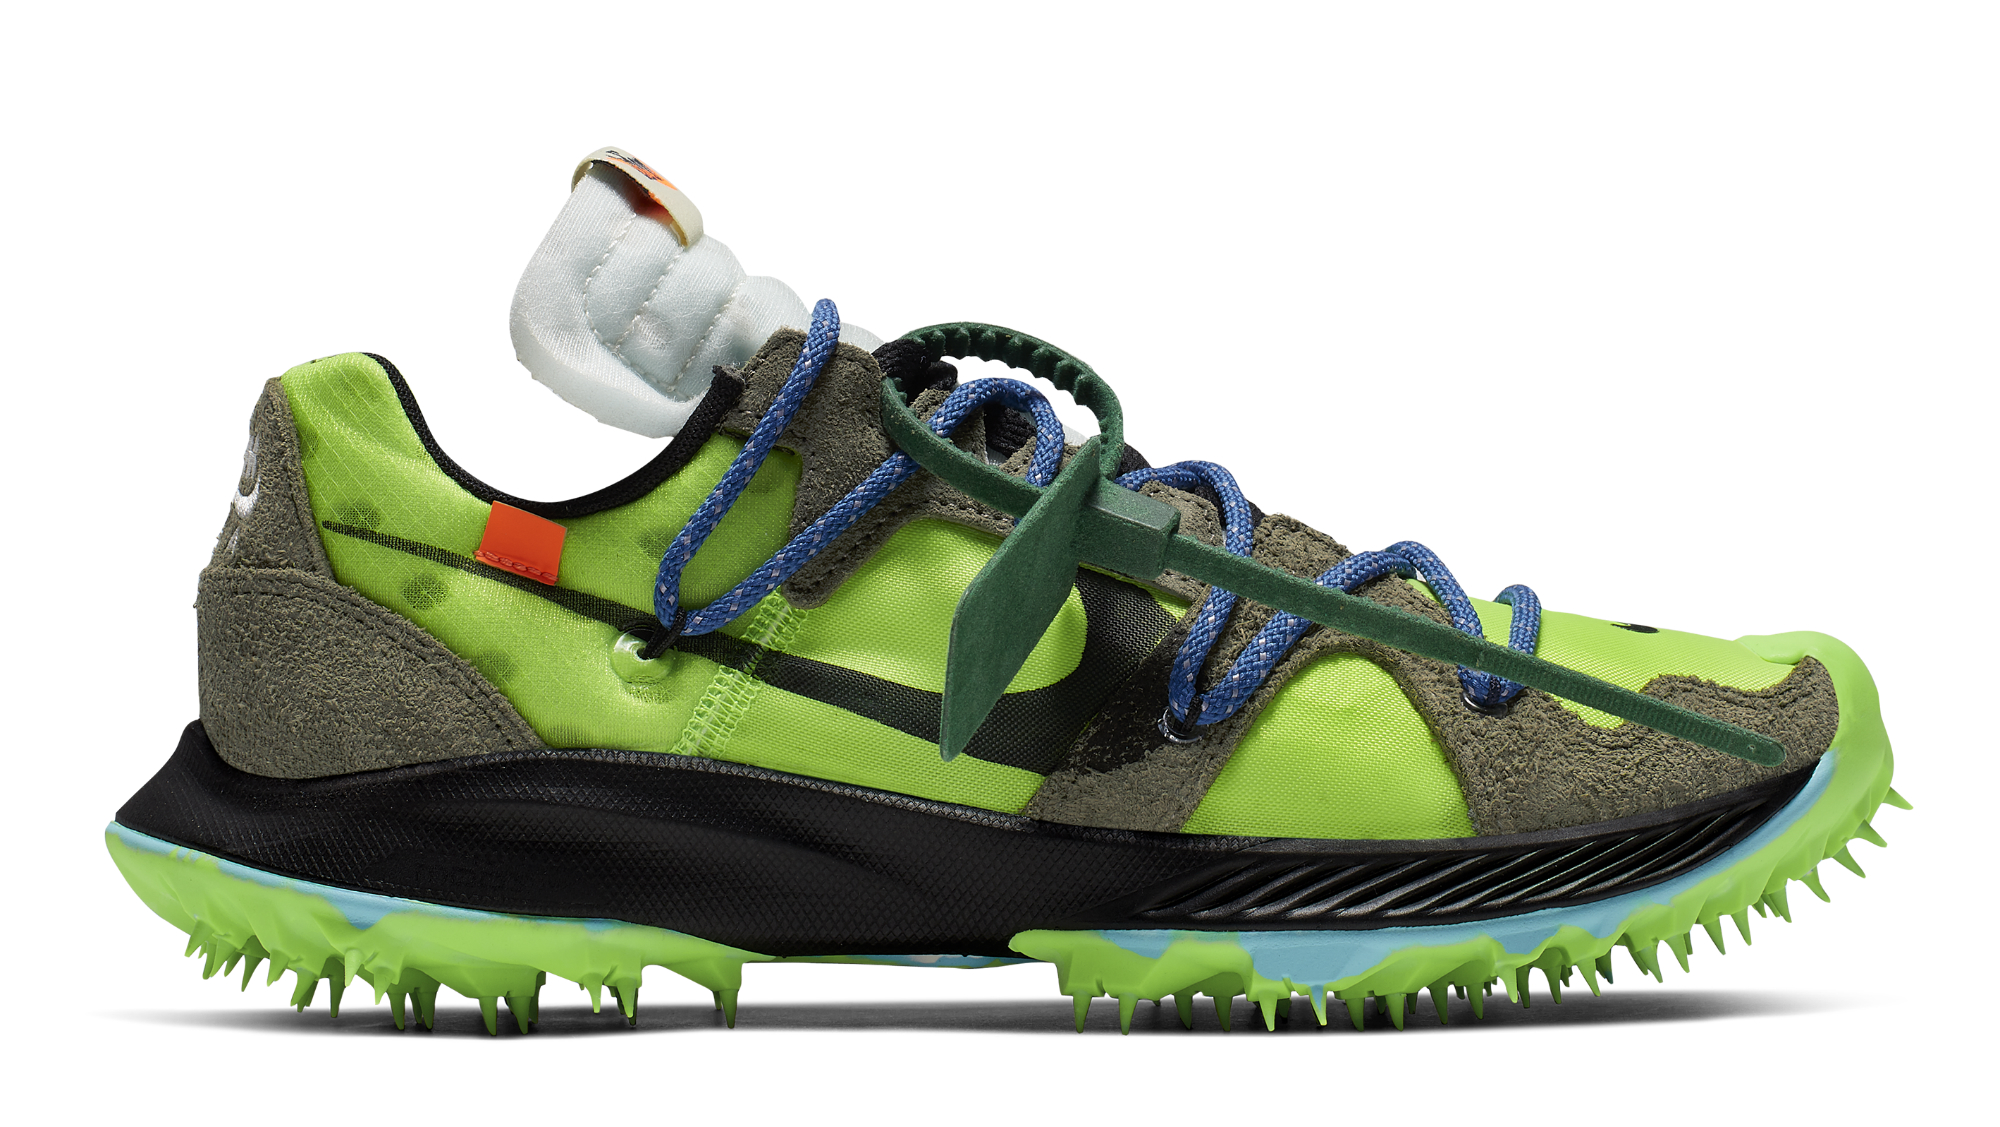 off white nike zoom terra kiger 5 electric green cd8179 300 release date